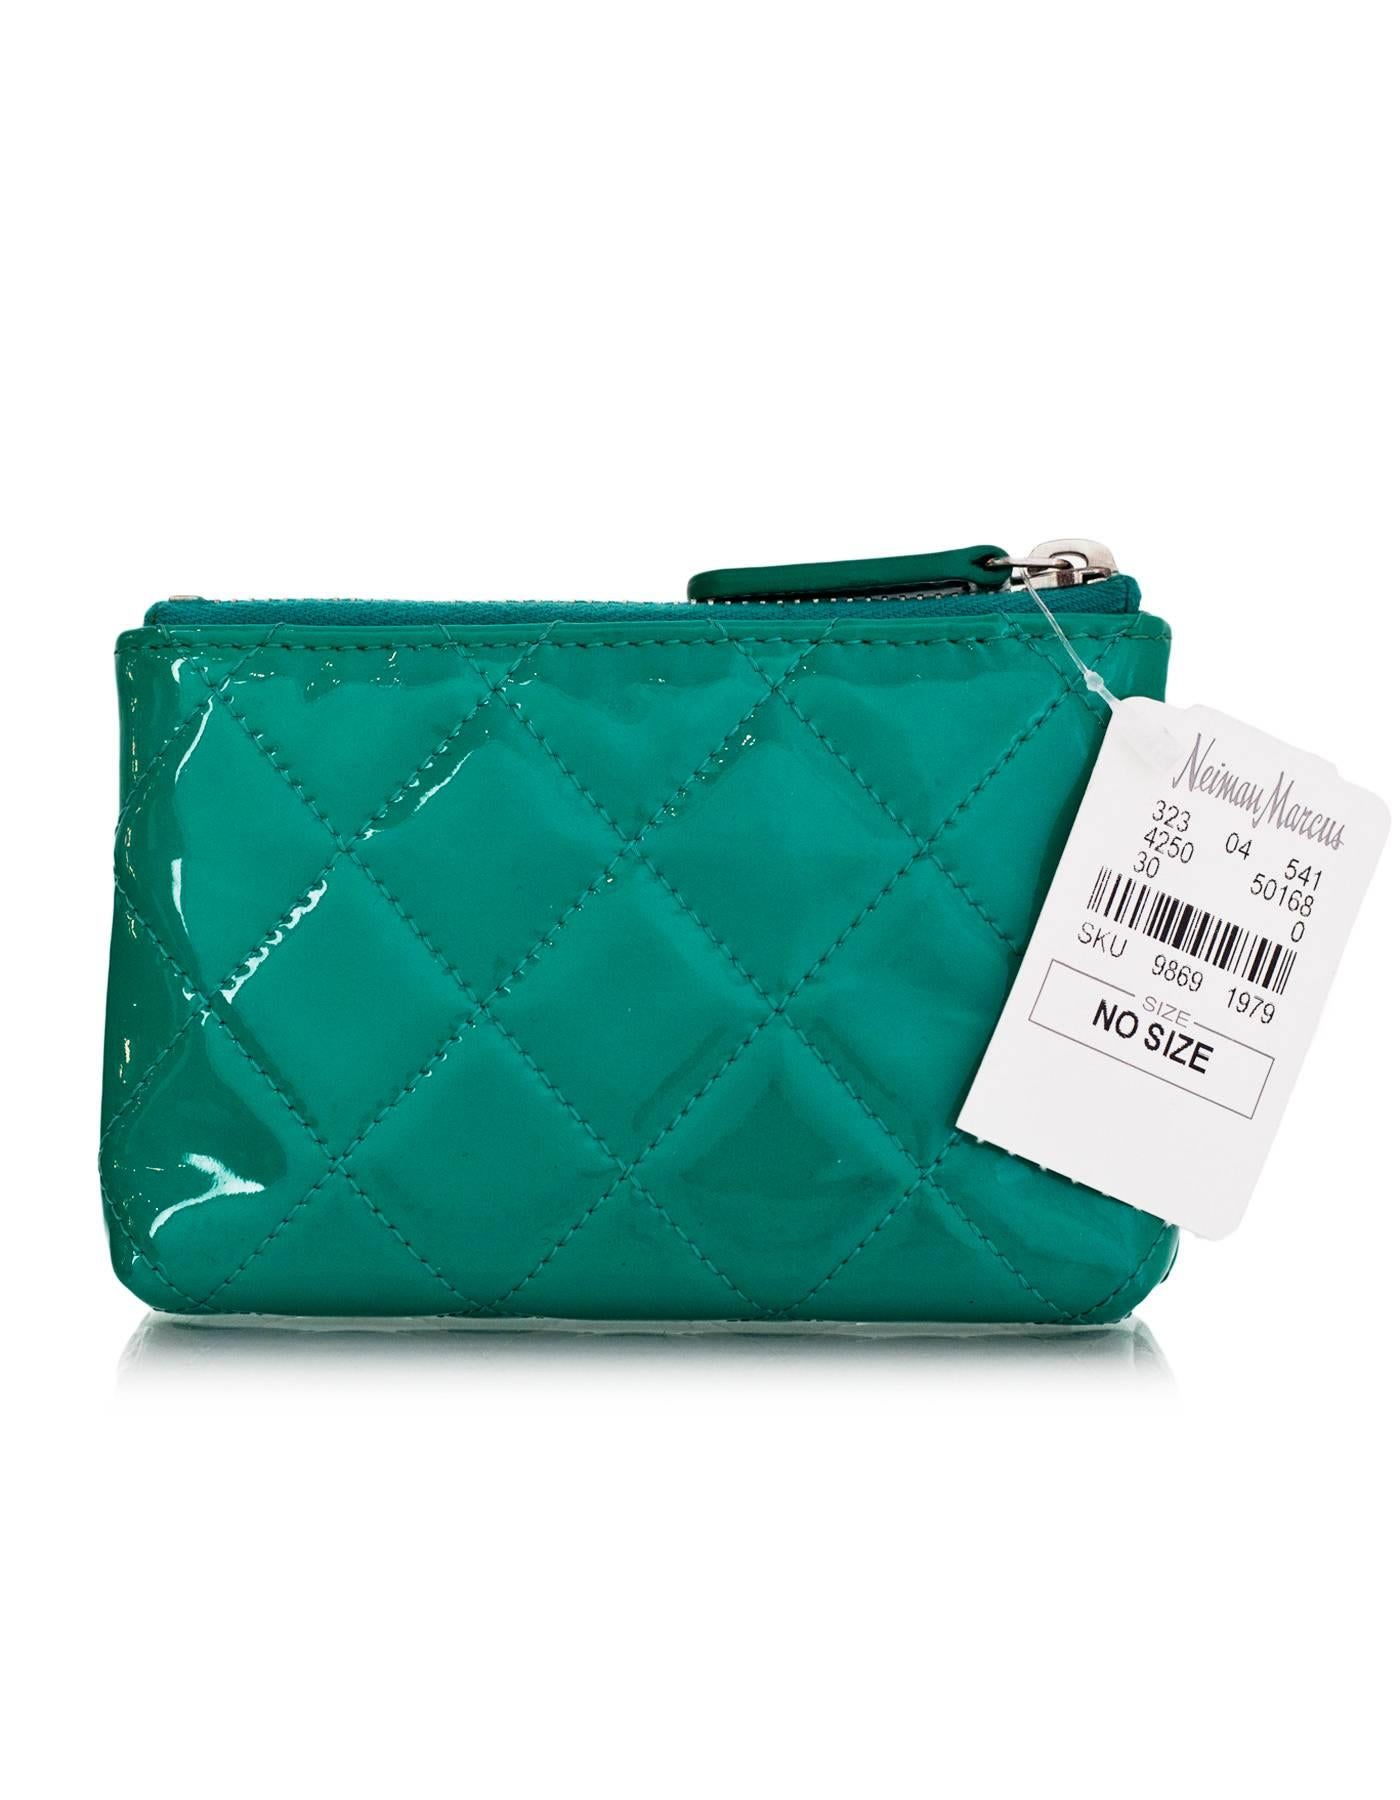 Chanel Turquoise Patent leather Quilted Card/Key Holder 
Features turquoise coated CC on front

Made In: Spain
Year of Production: 2012-2013
Color: Turquoise
Hardware: Silvertone
Materials: Patent leather
Lining: Turquoise grosgrain
Closure/Opening: